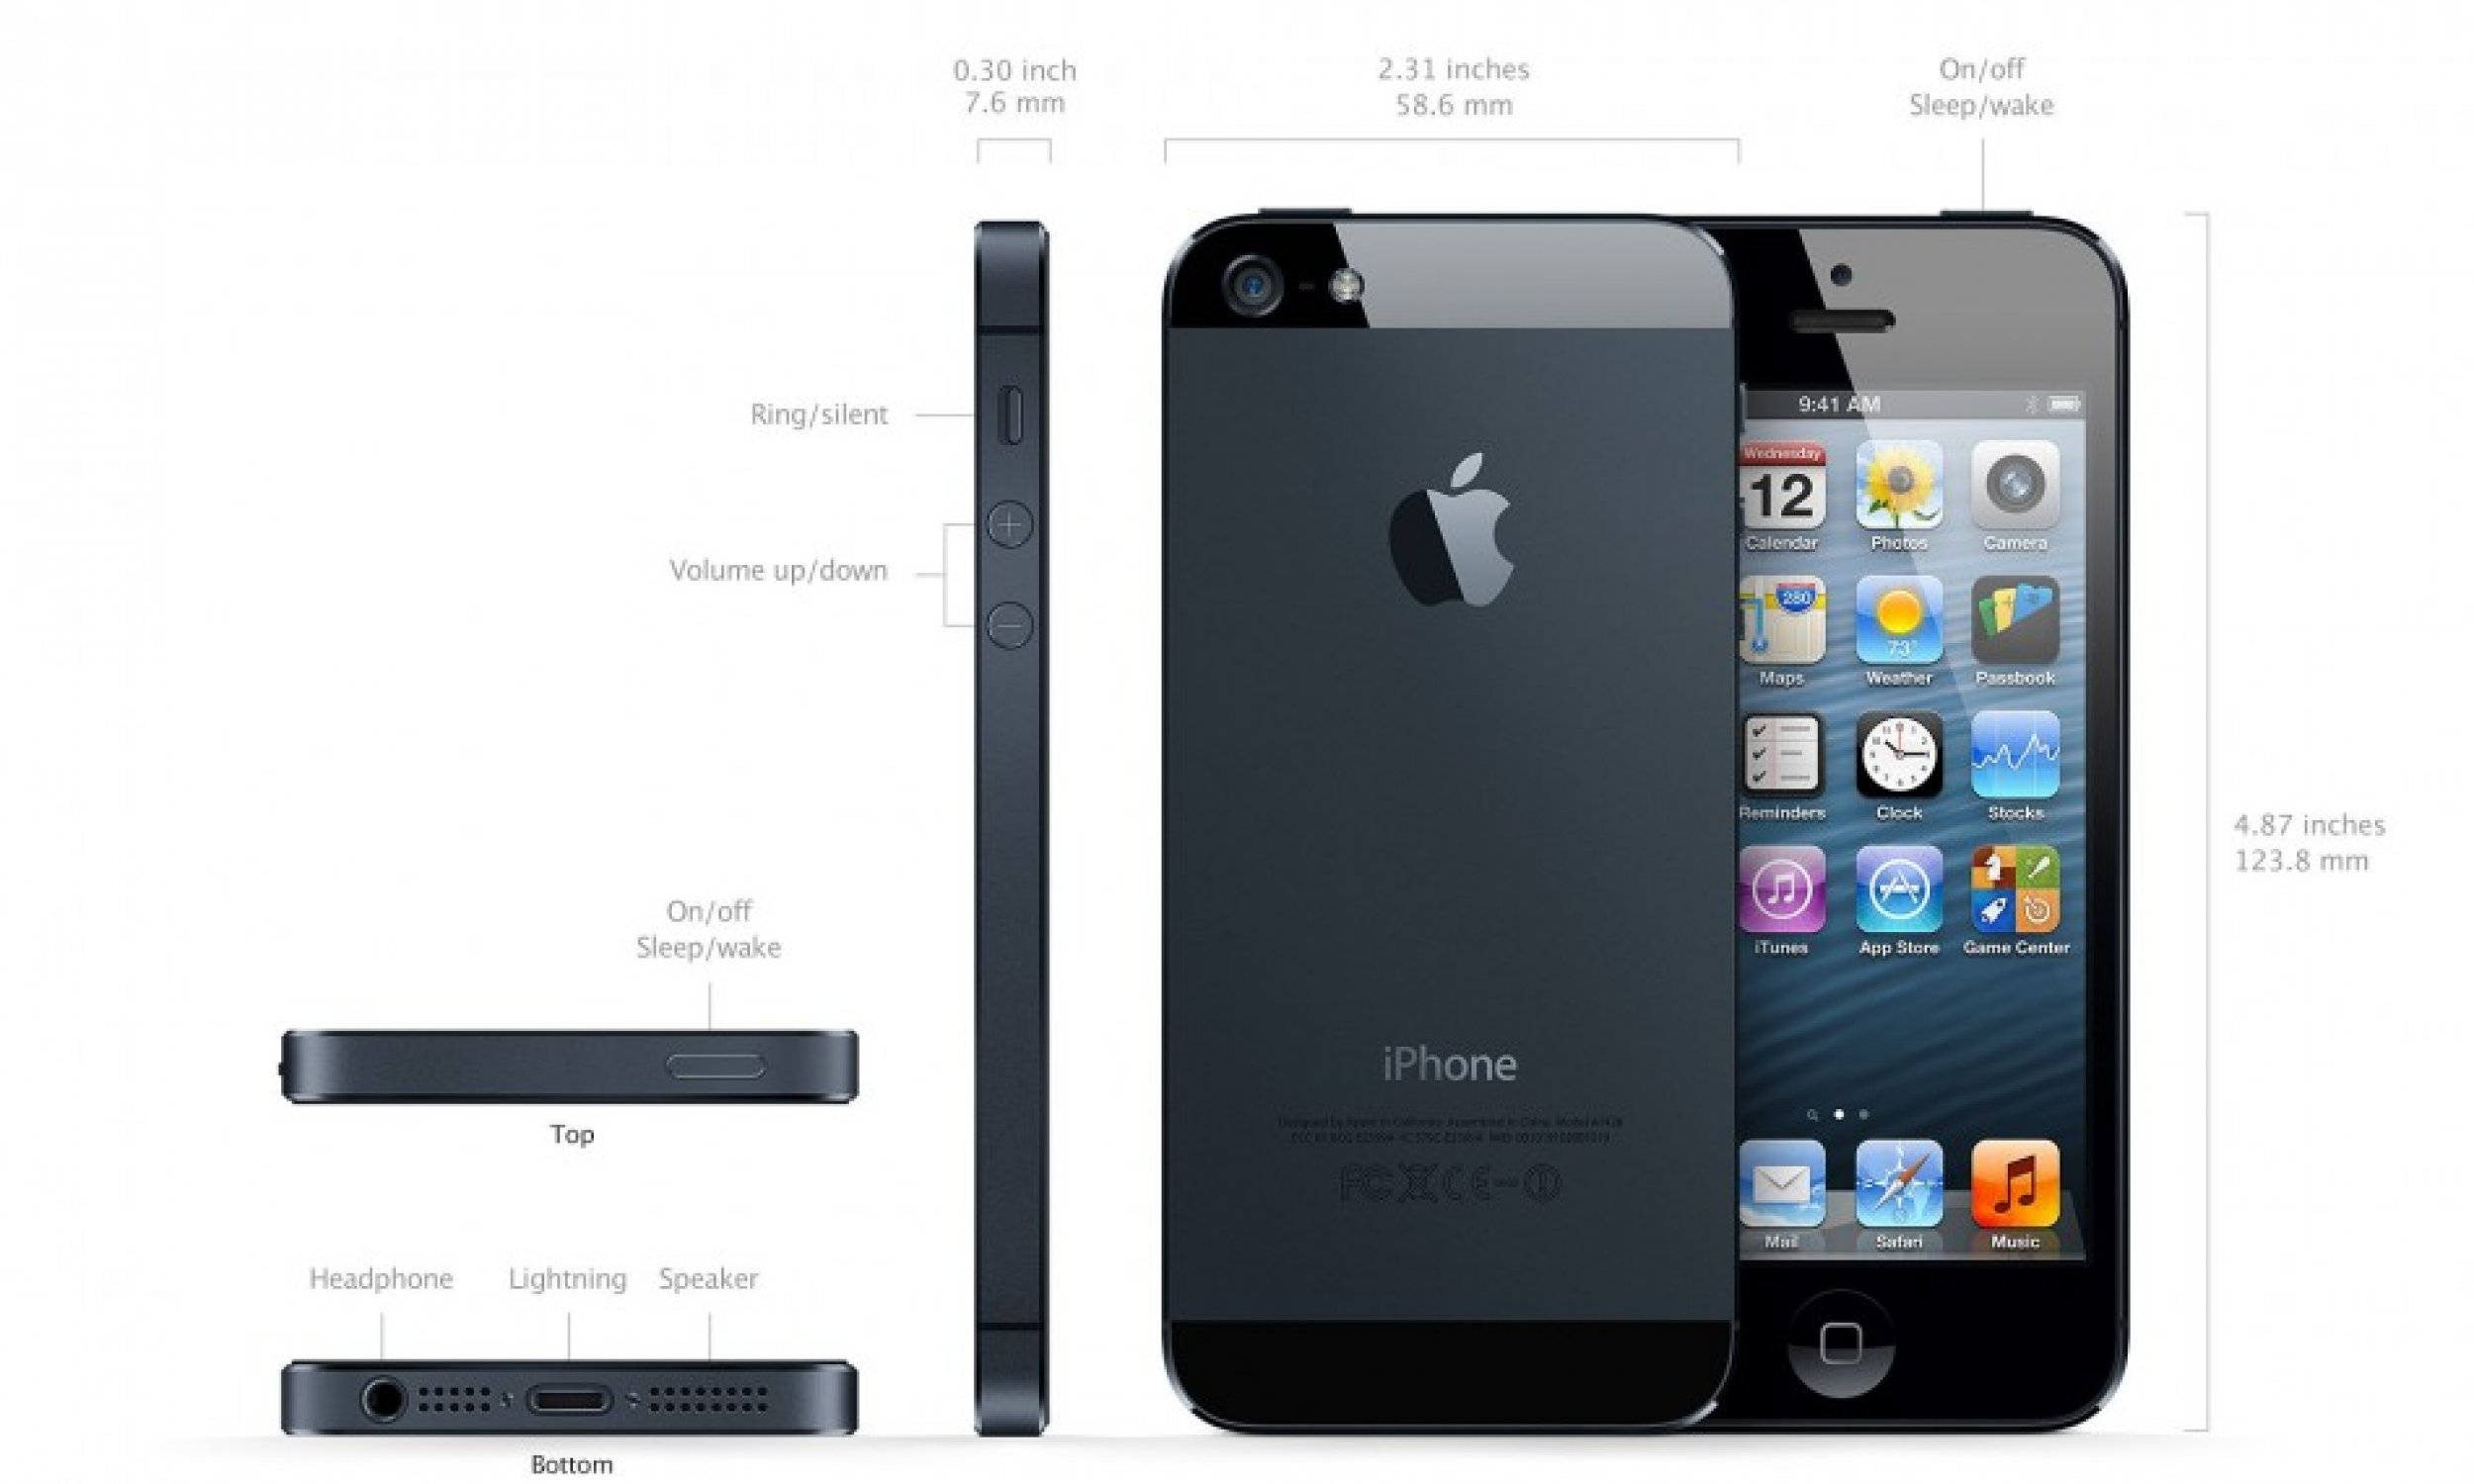 The Apple iPhone 5 quotThe Thinnest And Lightest iPhone Everquot